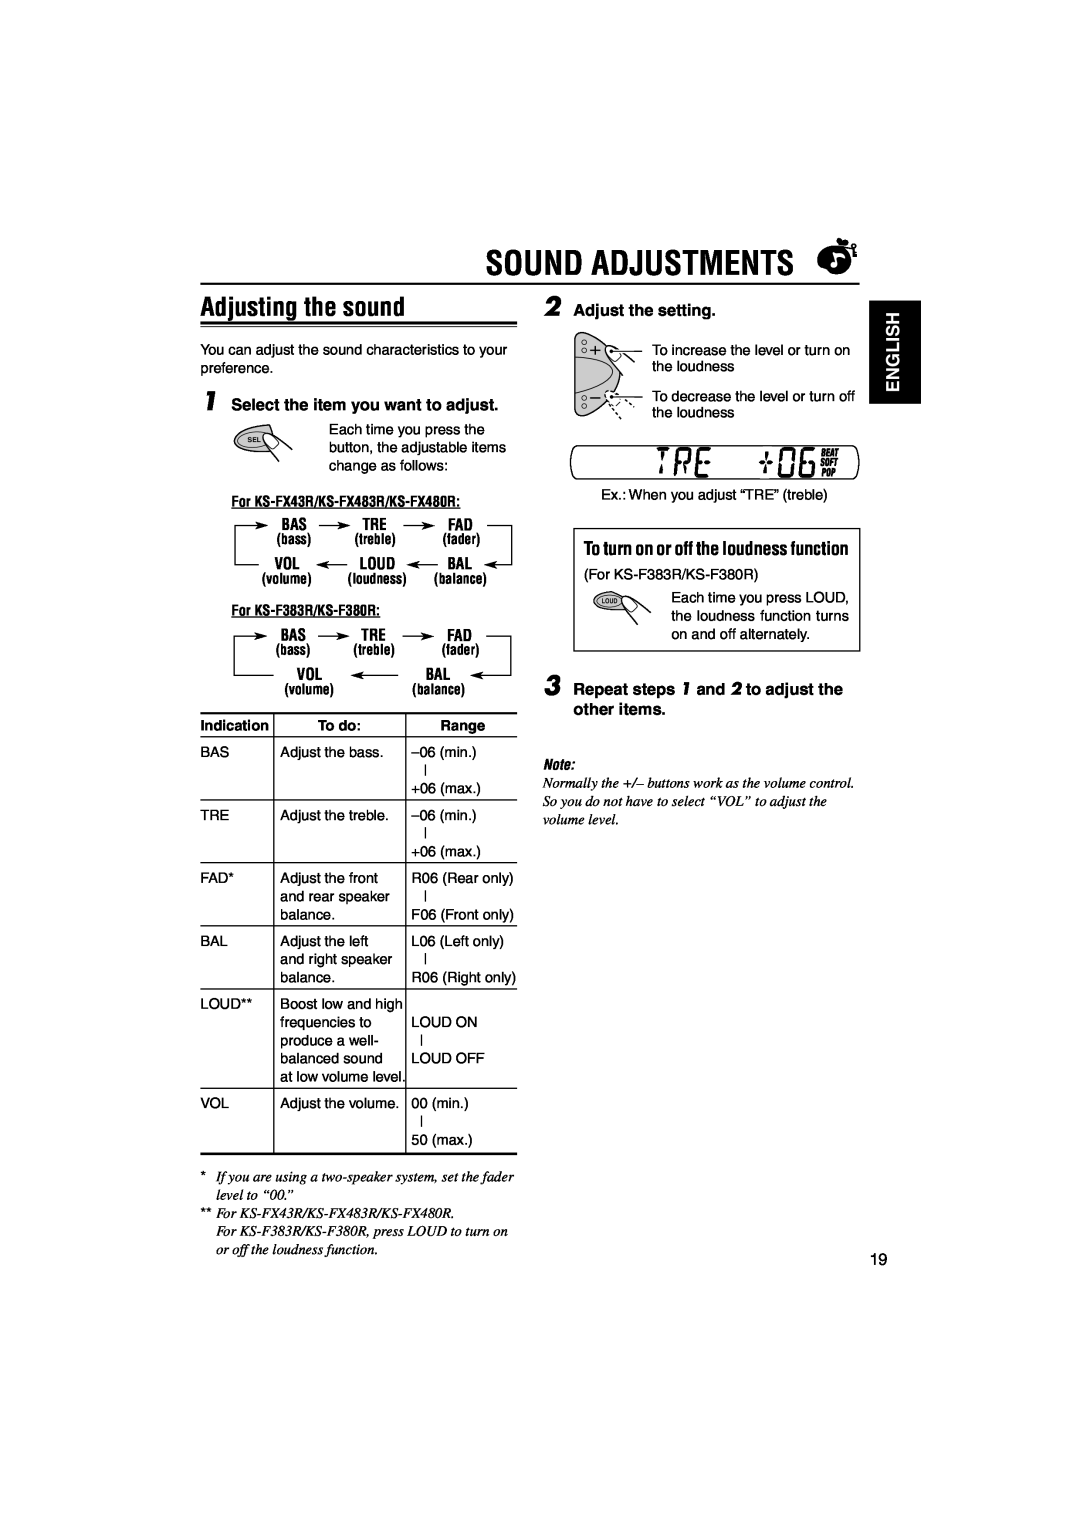 JVC KS-FX483R Sound Adjustments, Adjusting the sound, English, To turn on or off the loudness function, Adjust the setting 